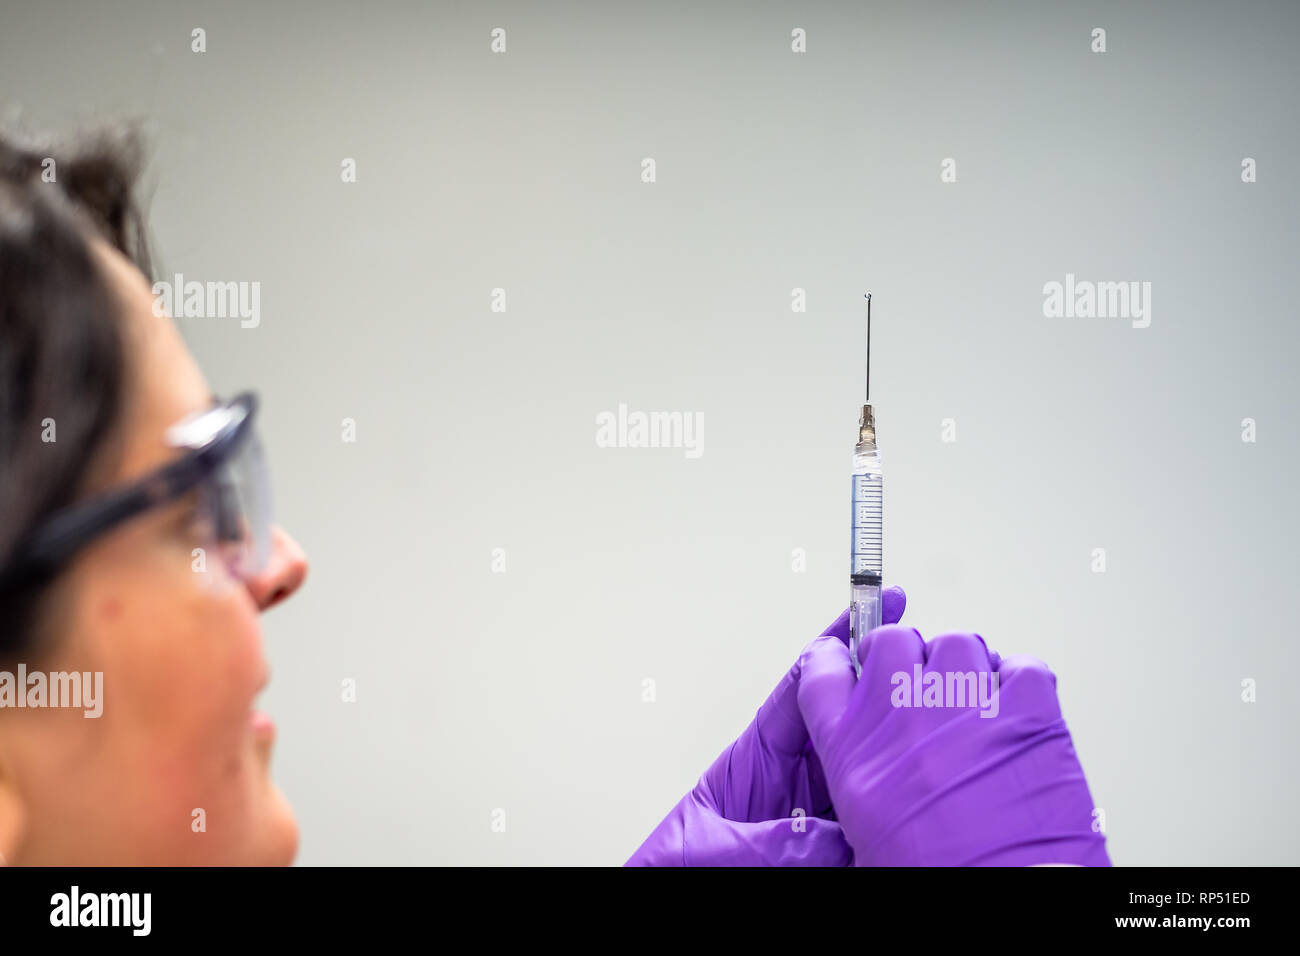 Doctor or nurse drawing injection or vaccine in syringe Stock Photo